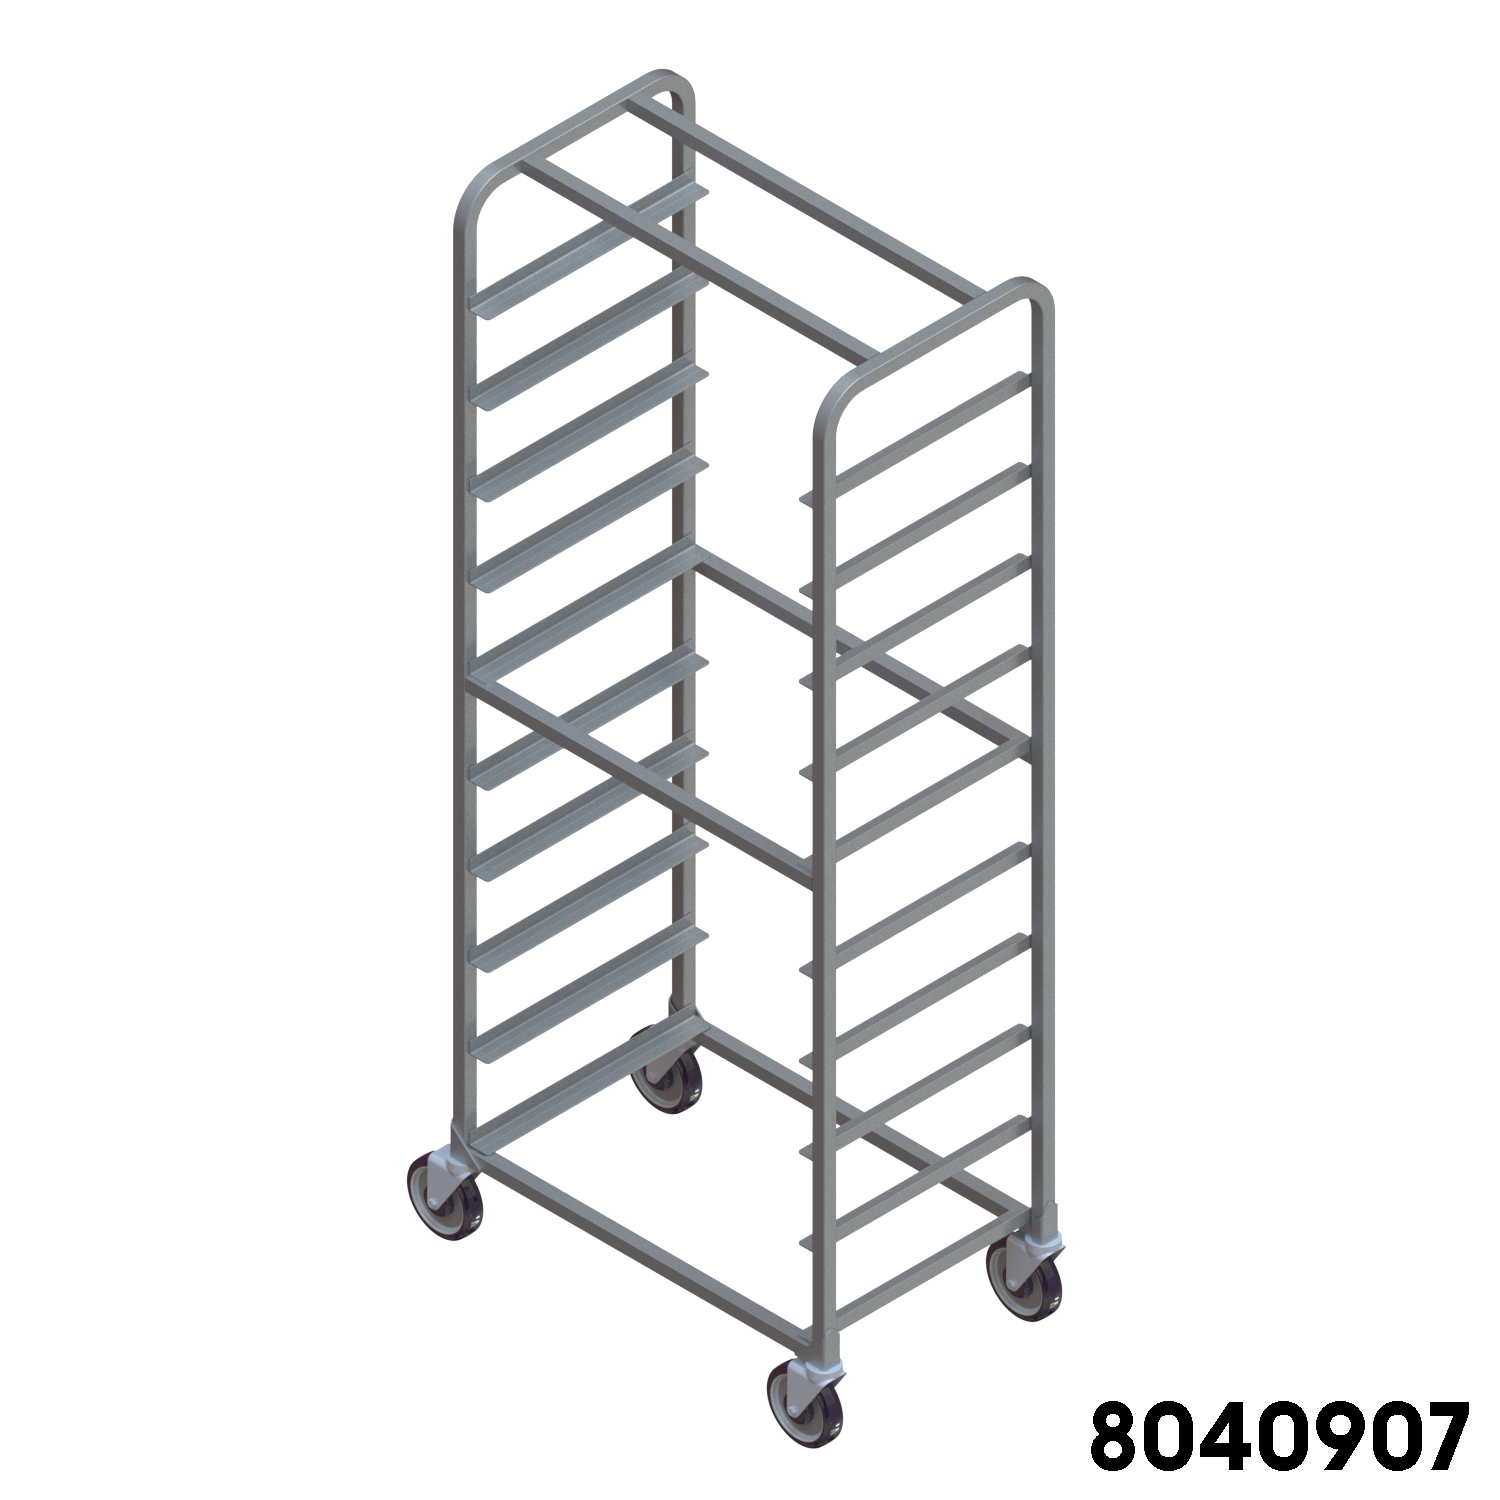 Aluminum Side Loading Pan Rack bakery rack restaurant cart grocery cart industrial cart nesting picking cart NSF cart NSF rack NSF approved NSF certified National Sanitation Foundation tray shelf Distribution Cart picking cart tray shelf picking cart, picking cart, ecom cart, ecommerce cart, ecommerce picking cart, picking cart, INDUSTRIAL CARTS, grocery cart grocery picking cart, department store cart, beverage cart NSF approved. This food service cart meets strict standards and procedures imposed by NSF. lug cart meat department, produce department bakery cart bakery rack bakery carts bakery racks meat rack meat cart sushi cart salad bar cart deli cart stream table cart buffet cart